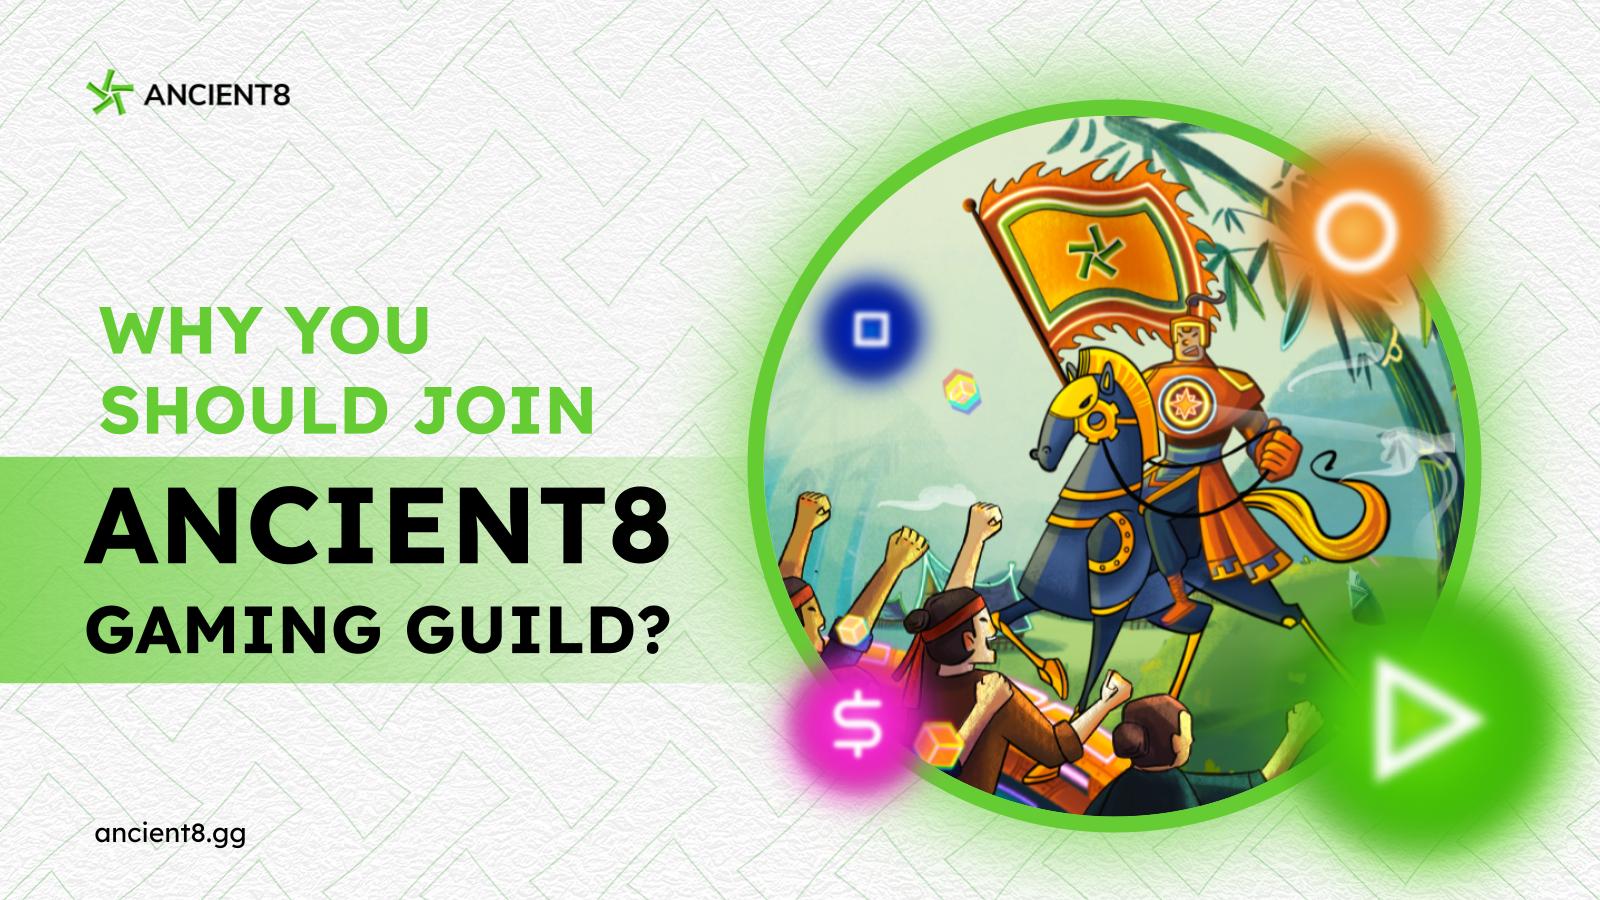 Why you should join Ancient8 Gaming Guild?